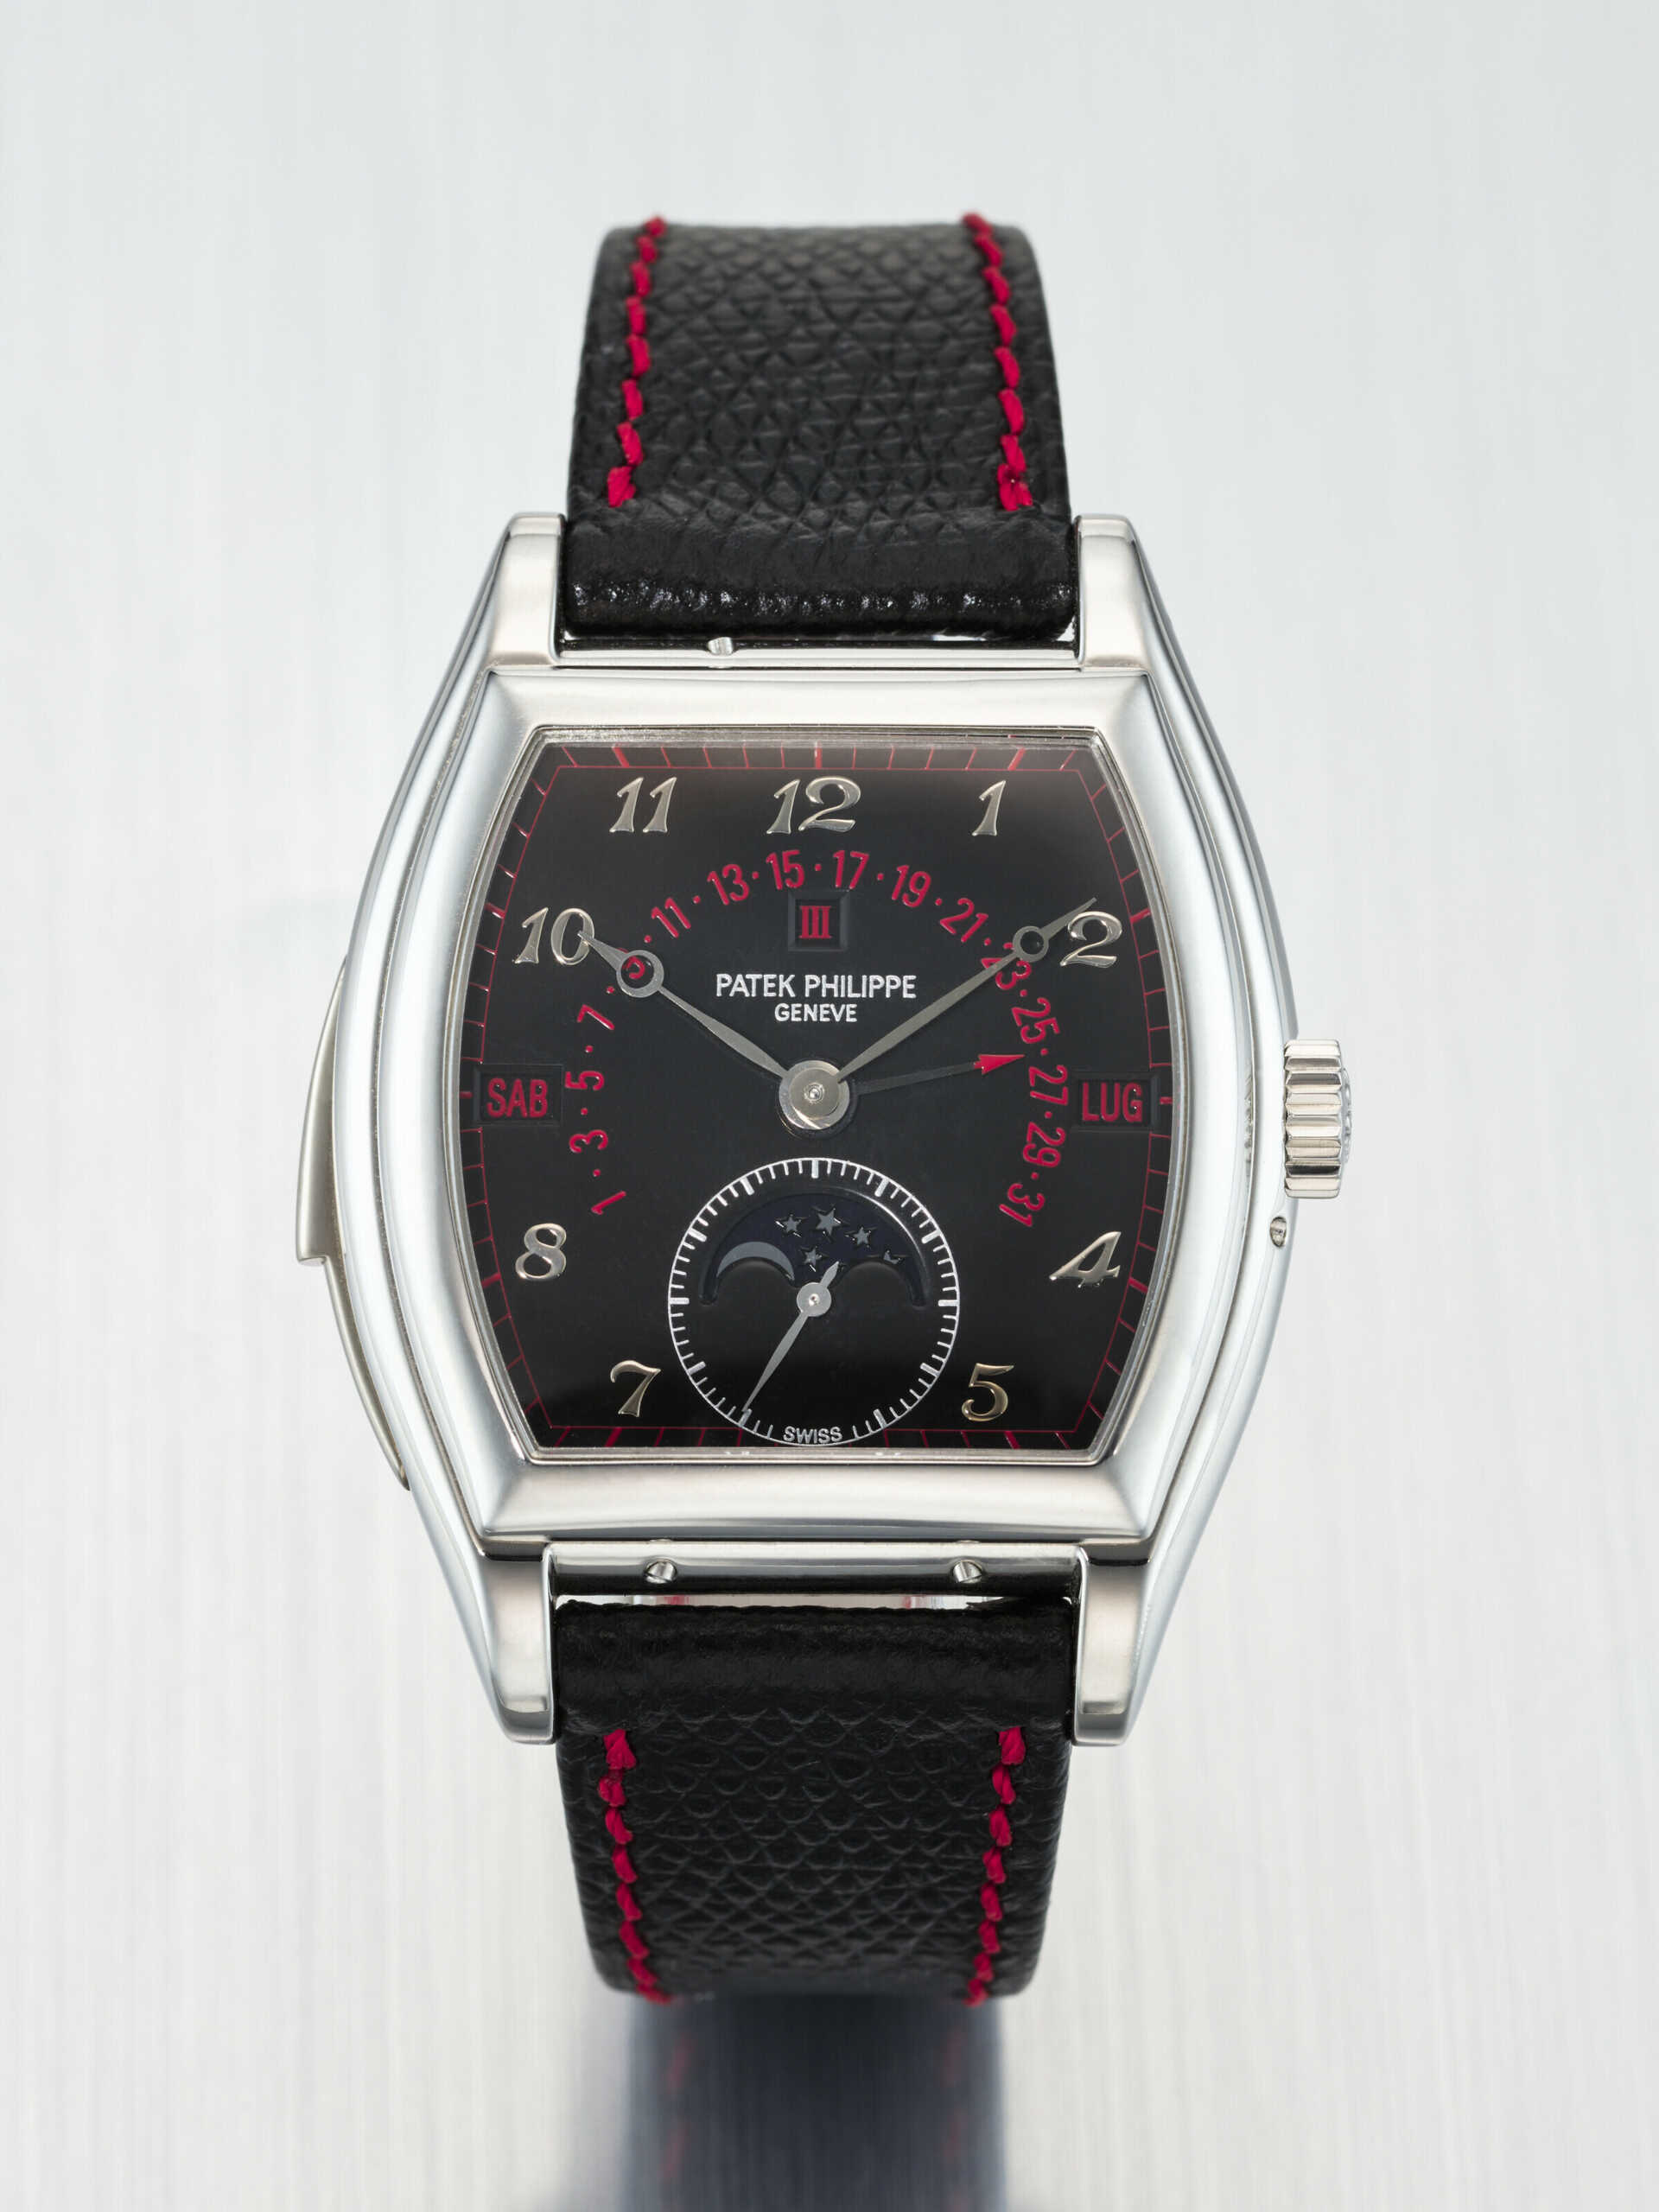 PATEK PHILIPPE. A POSSIBLY UNIQUE AND EXCEPTIONAL PLATINUM TONNEAU-SHAPED AUTOMATIC MINUTE REPEATING PERPETUAL CALENDAR WRISTWATCH WITH RETROGRADE DATE, MOON PHASES, LEAP YEAR INDICATION, BREGUET NUMERALS, RED CALENDARS AND MINUTE TRACK